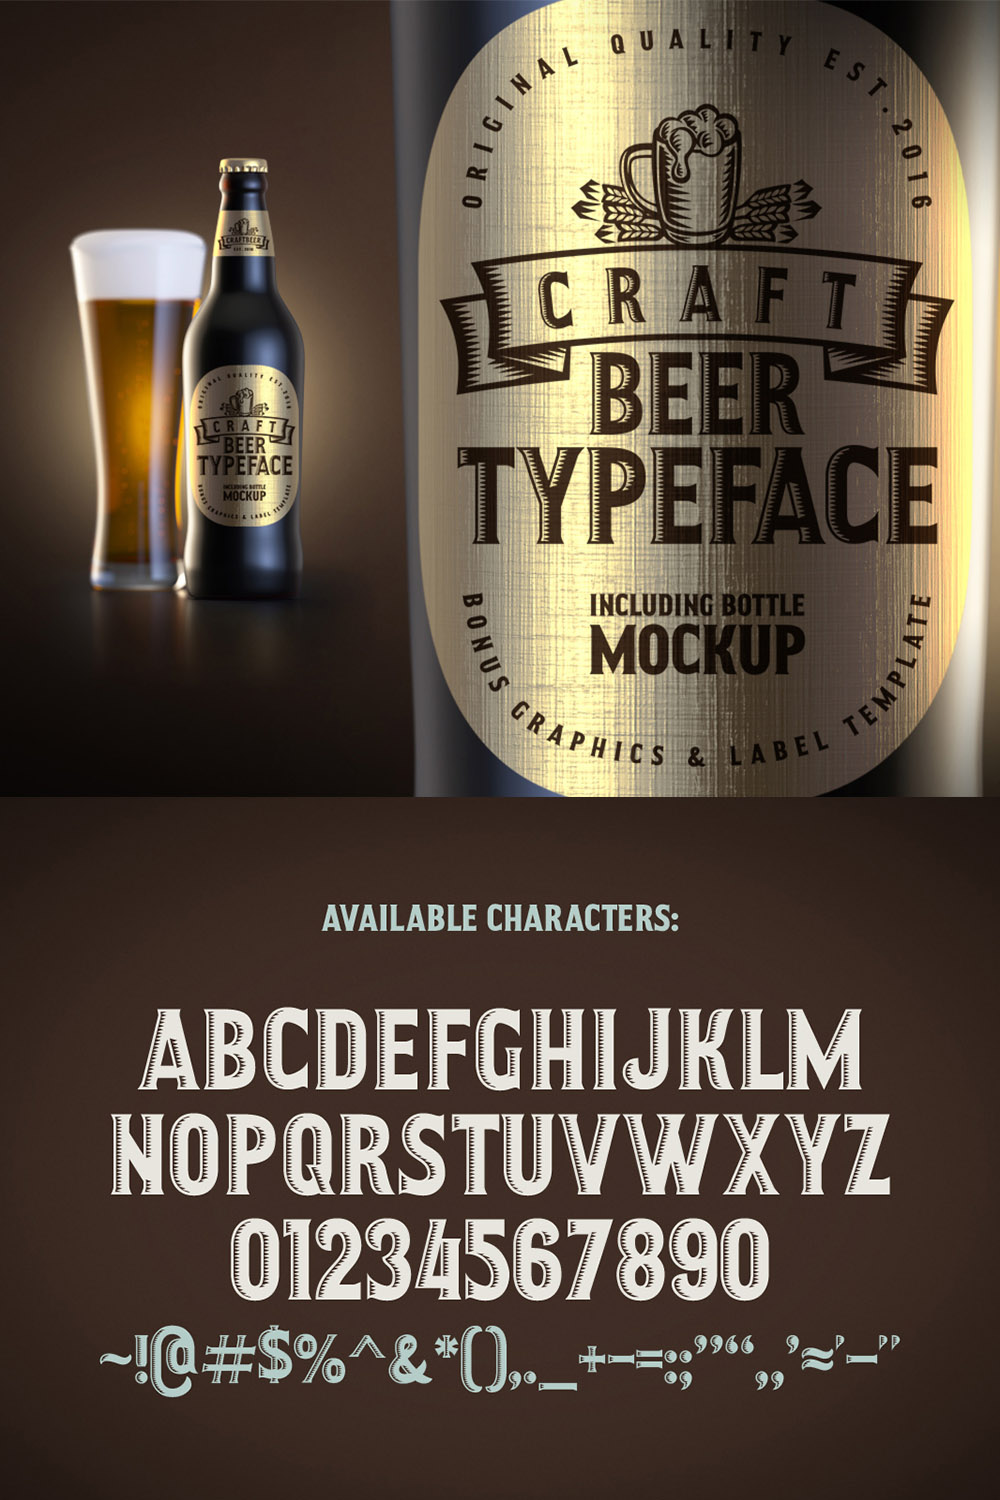 Craft Beer Typeface Pinterest Collage image.